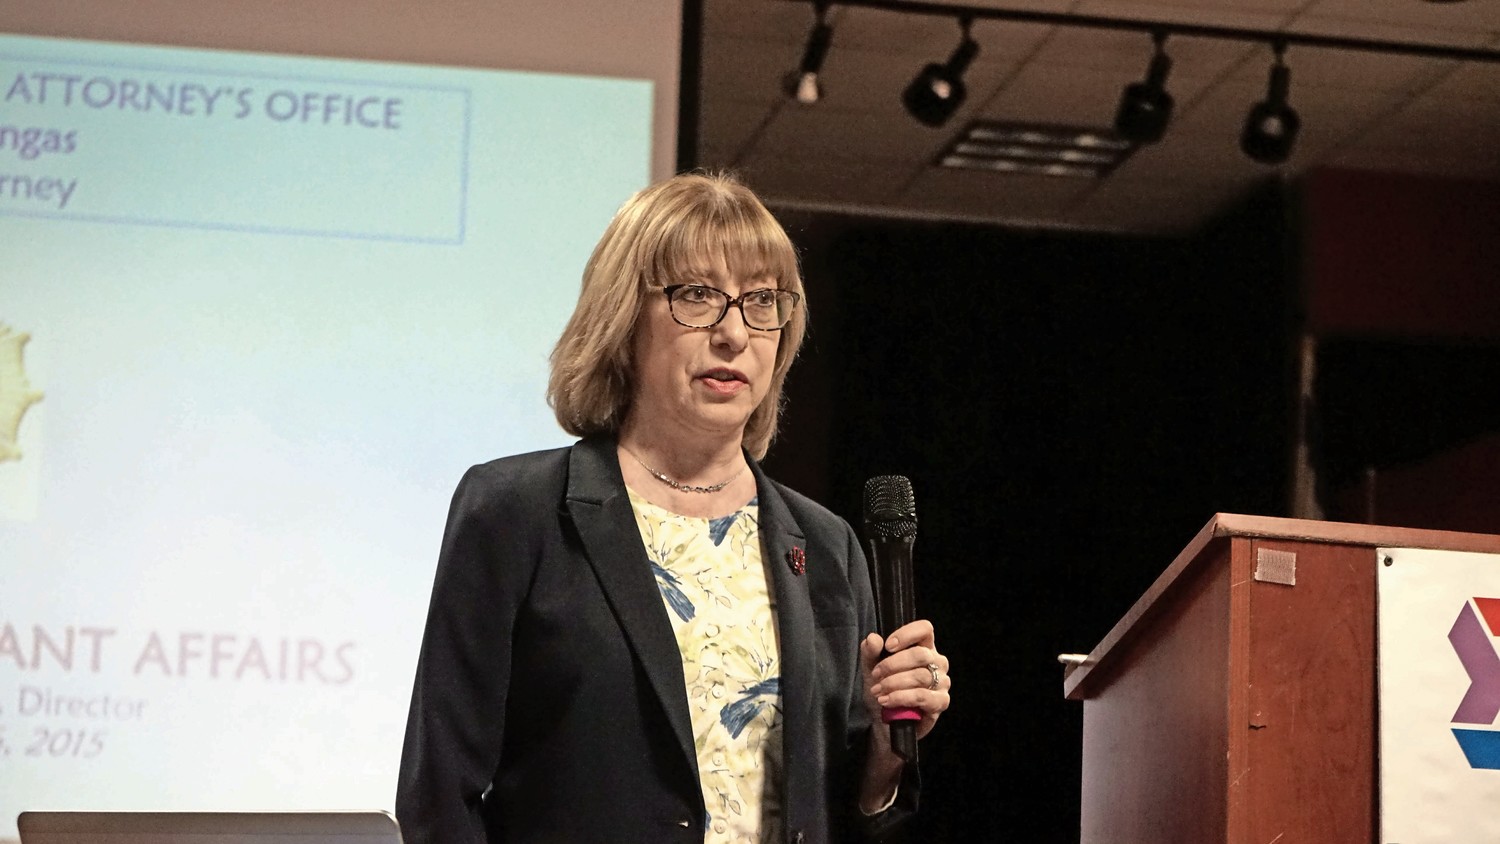 Silvia Finkelstein, director of immigrant affairs for the Nassau County District Attorney’s Office, talked about the rising fear of law enforcement among immigrants at a conference in Oceanside earlier this year.